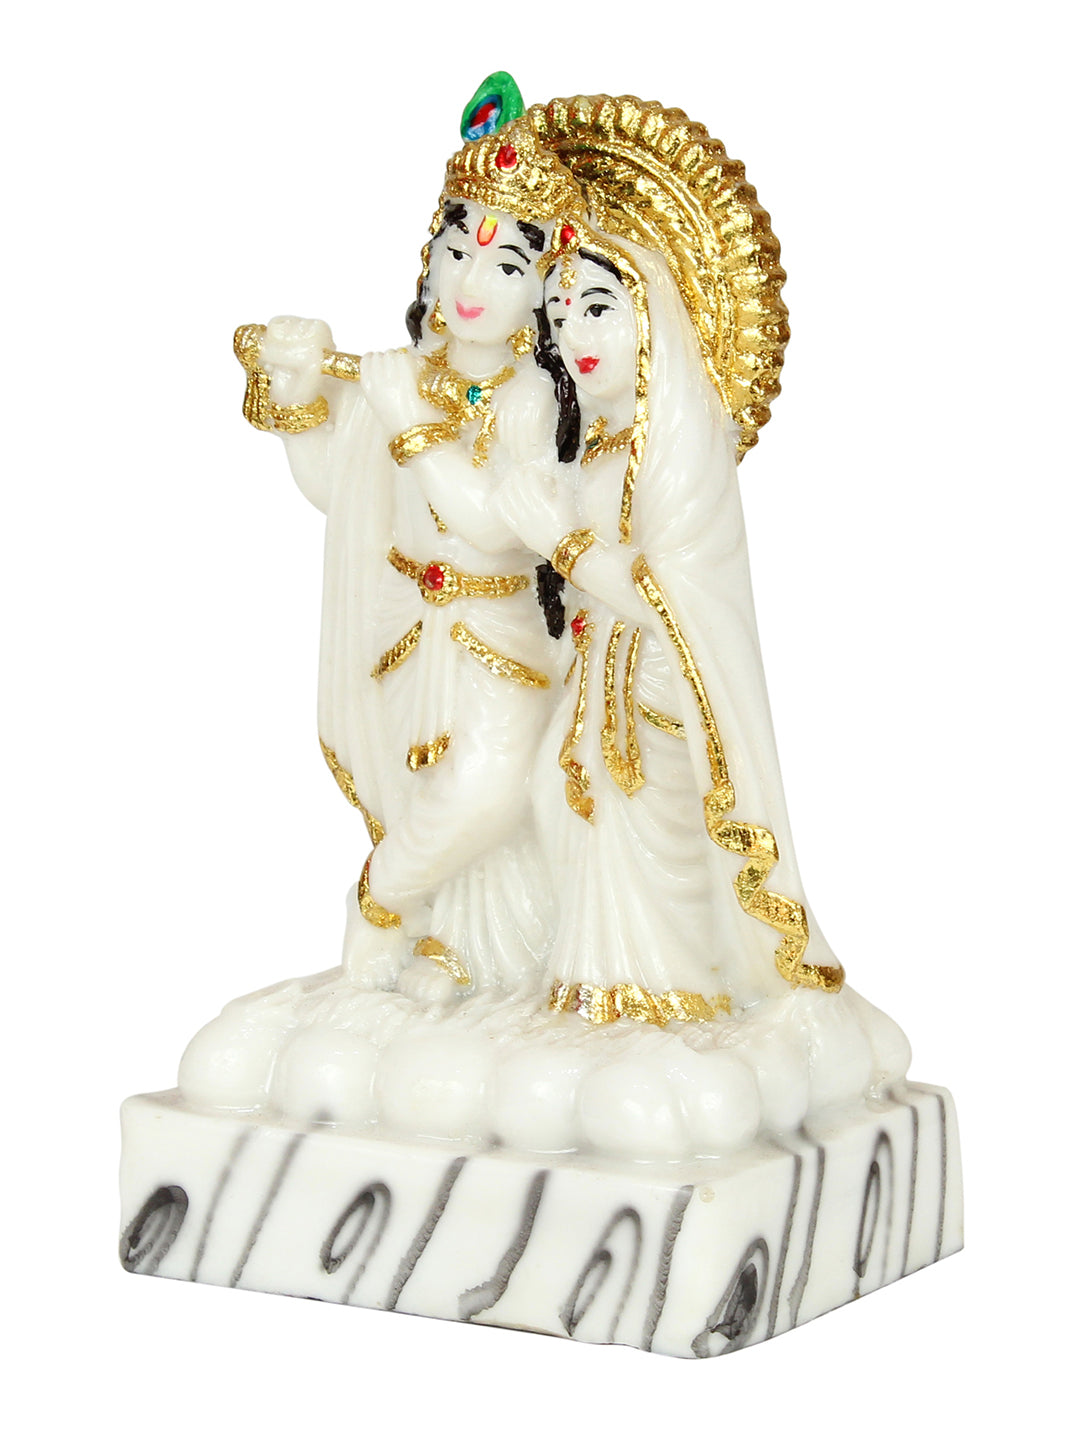 Buy Apex Merchandise- Radha Krishna Statue Murti Idol | Marriage, Wedding  Gift for Couples | Aniversary Gift | Krishna Idol | Showpiece |Radha Krishna  Statue Online at Low Prices in India - Amazon.in